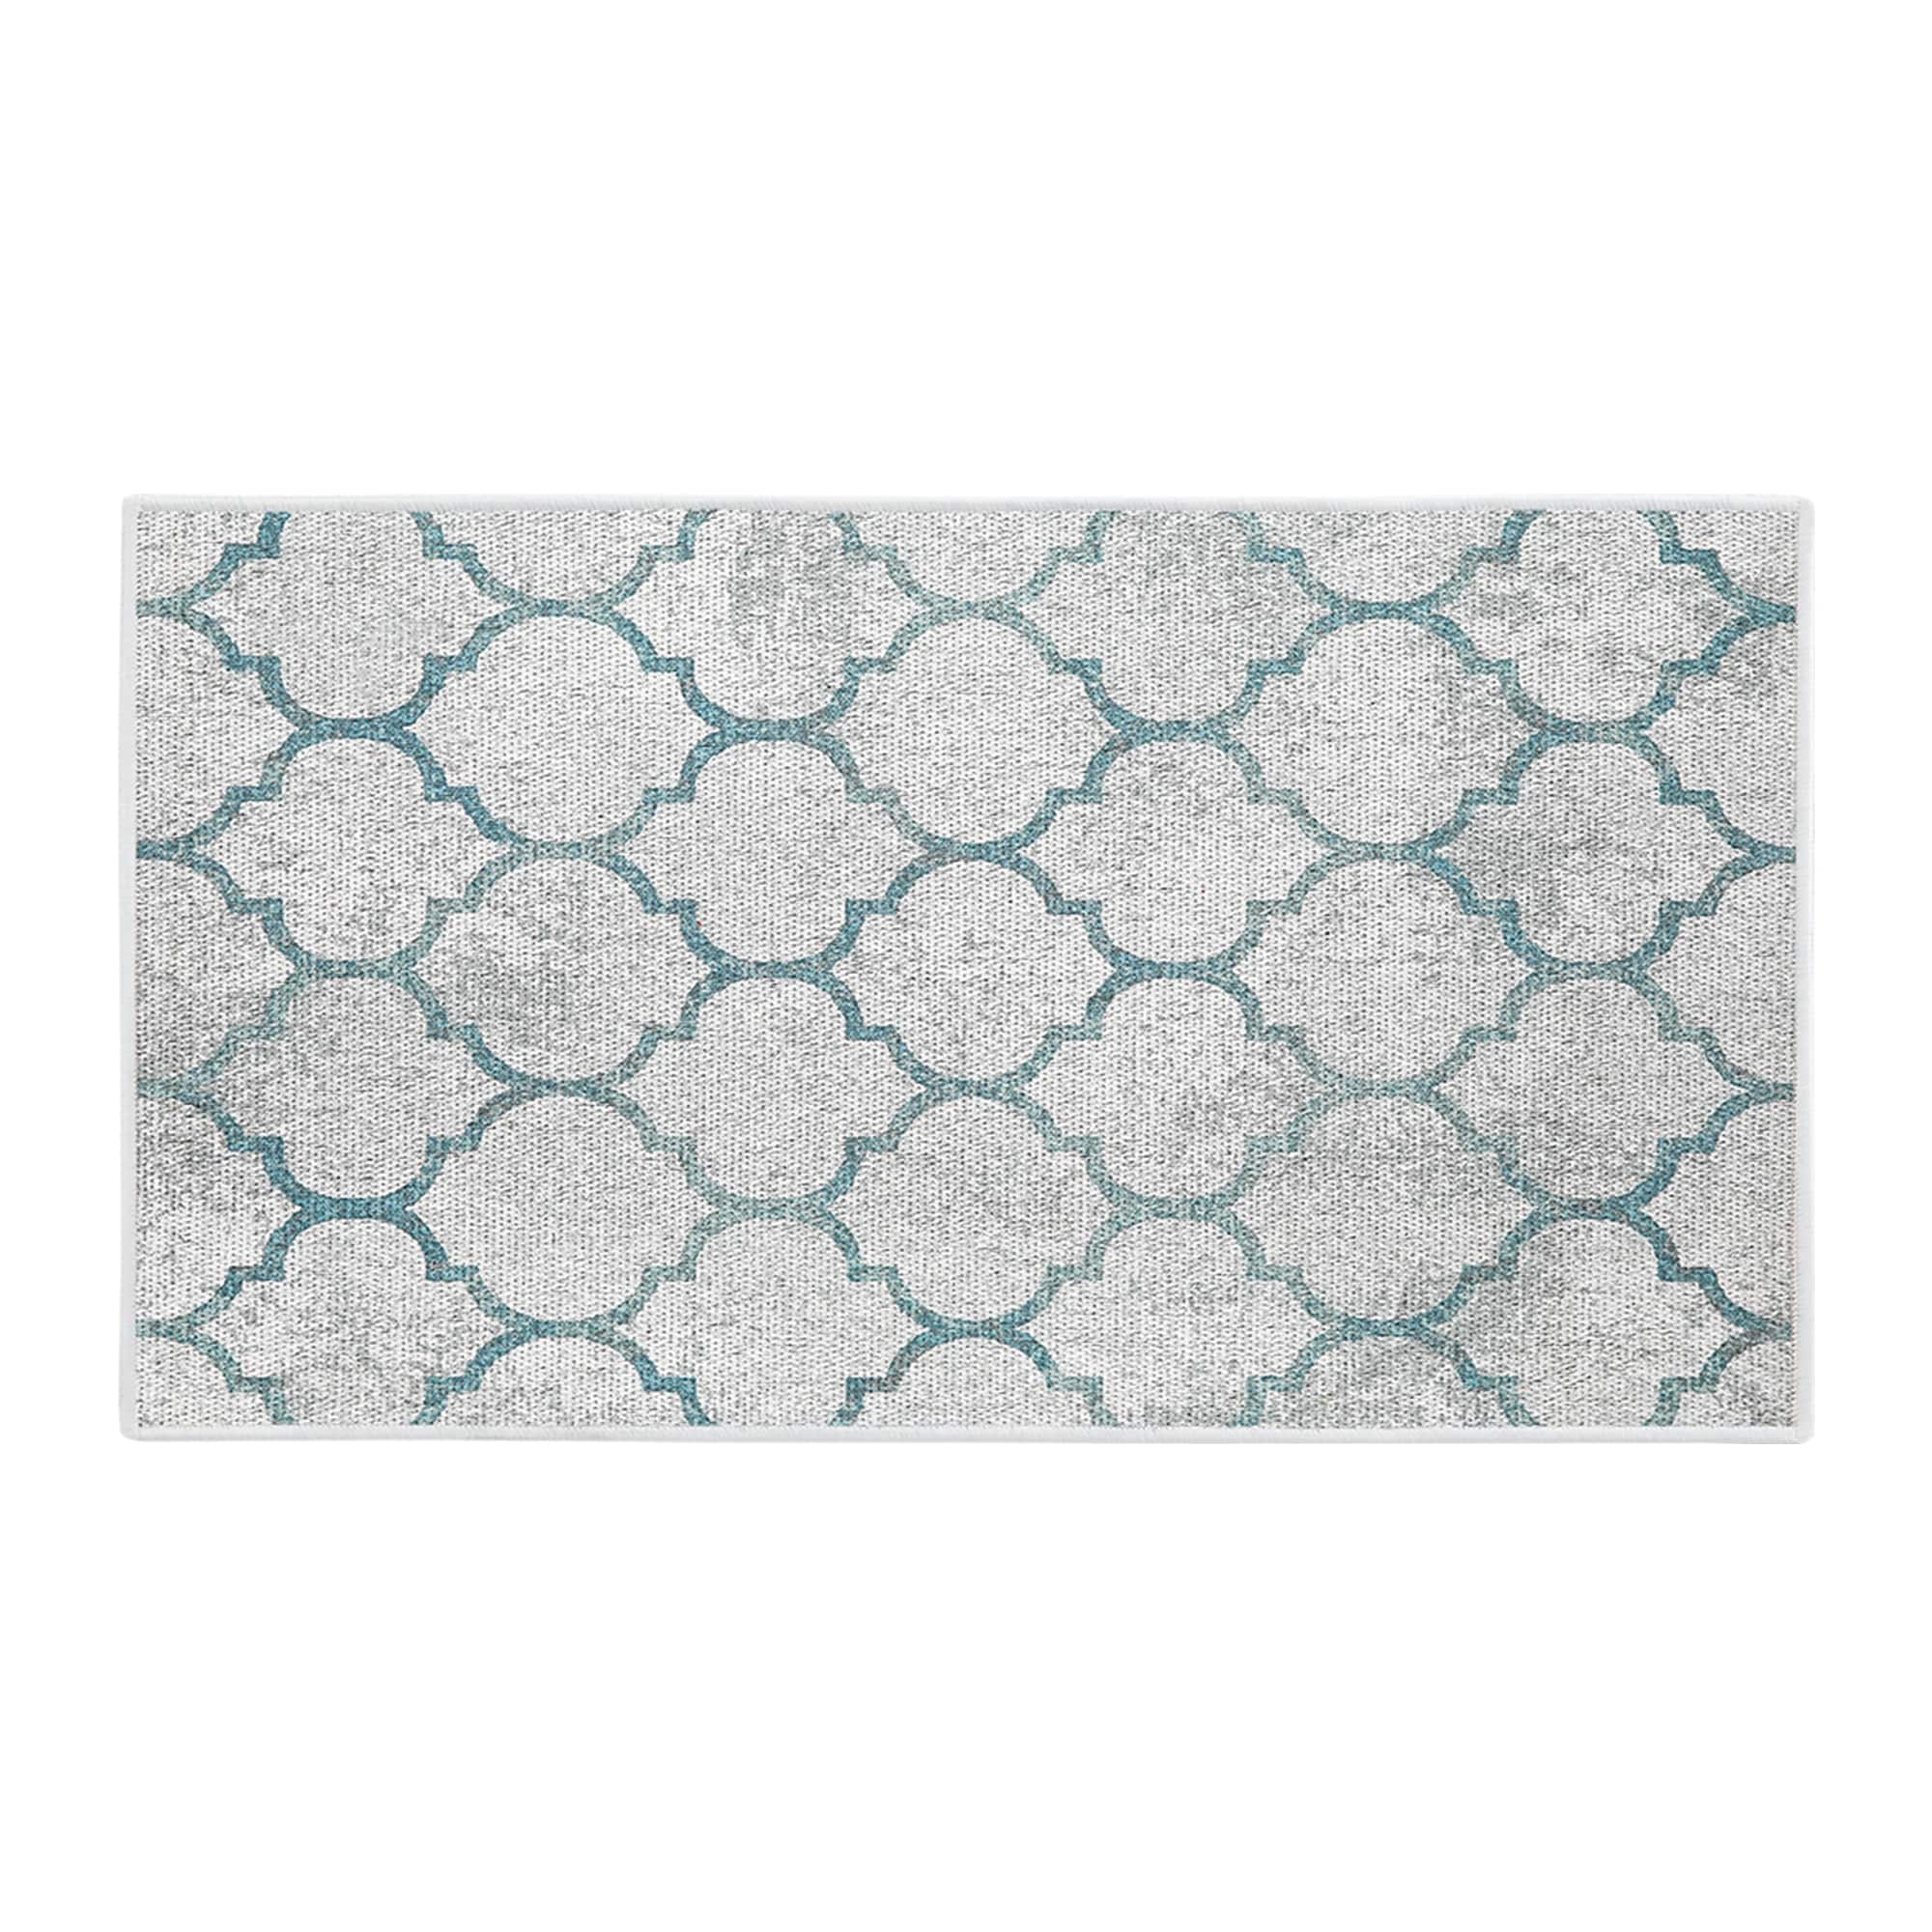 https://ak1.ostkcdn.com/images/products/is/images/direct/615bb1032bb9953dcf7ac7b661a81168930d7600/SussexHome-Non-Skid-Ultra-Thin-Area-Rugs-for-Laundry-Room%2C-Entryway%2C-Bathroom-and-Kitchen---Washable-Multipurpose-Floor-Mat.jpg